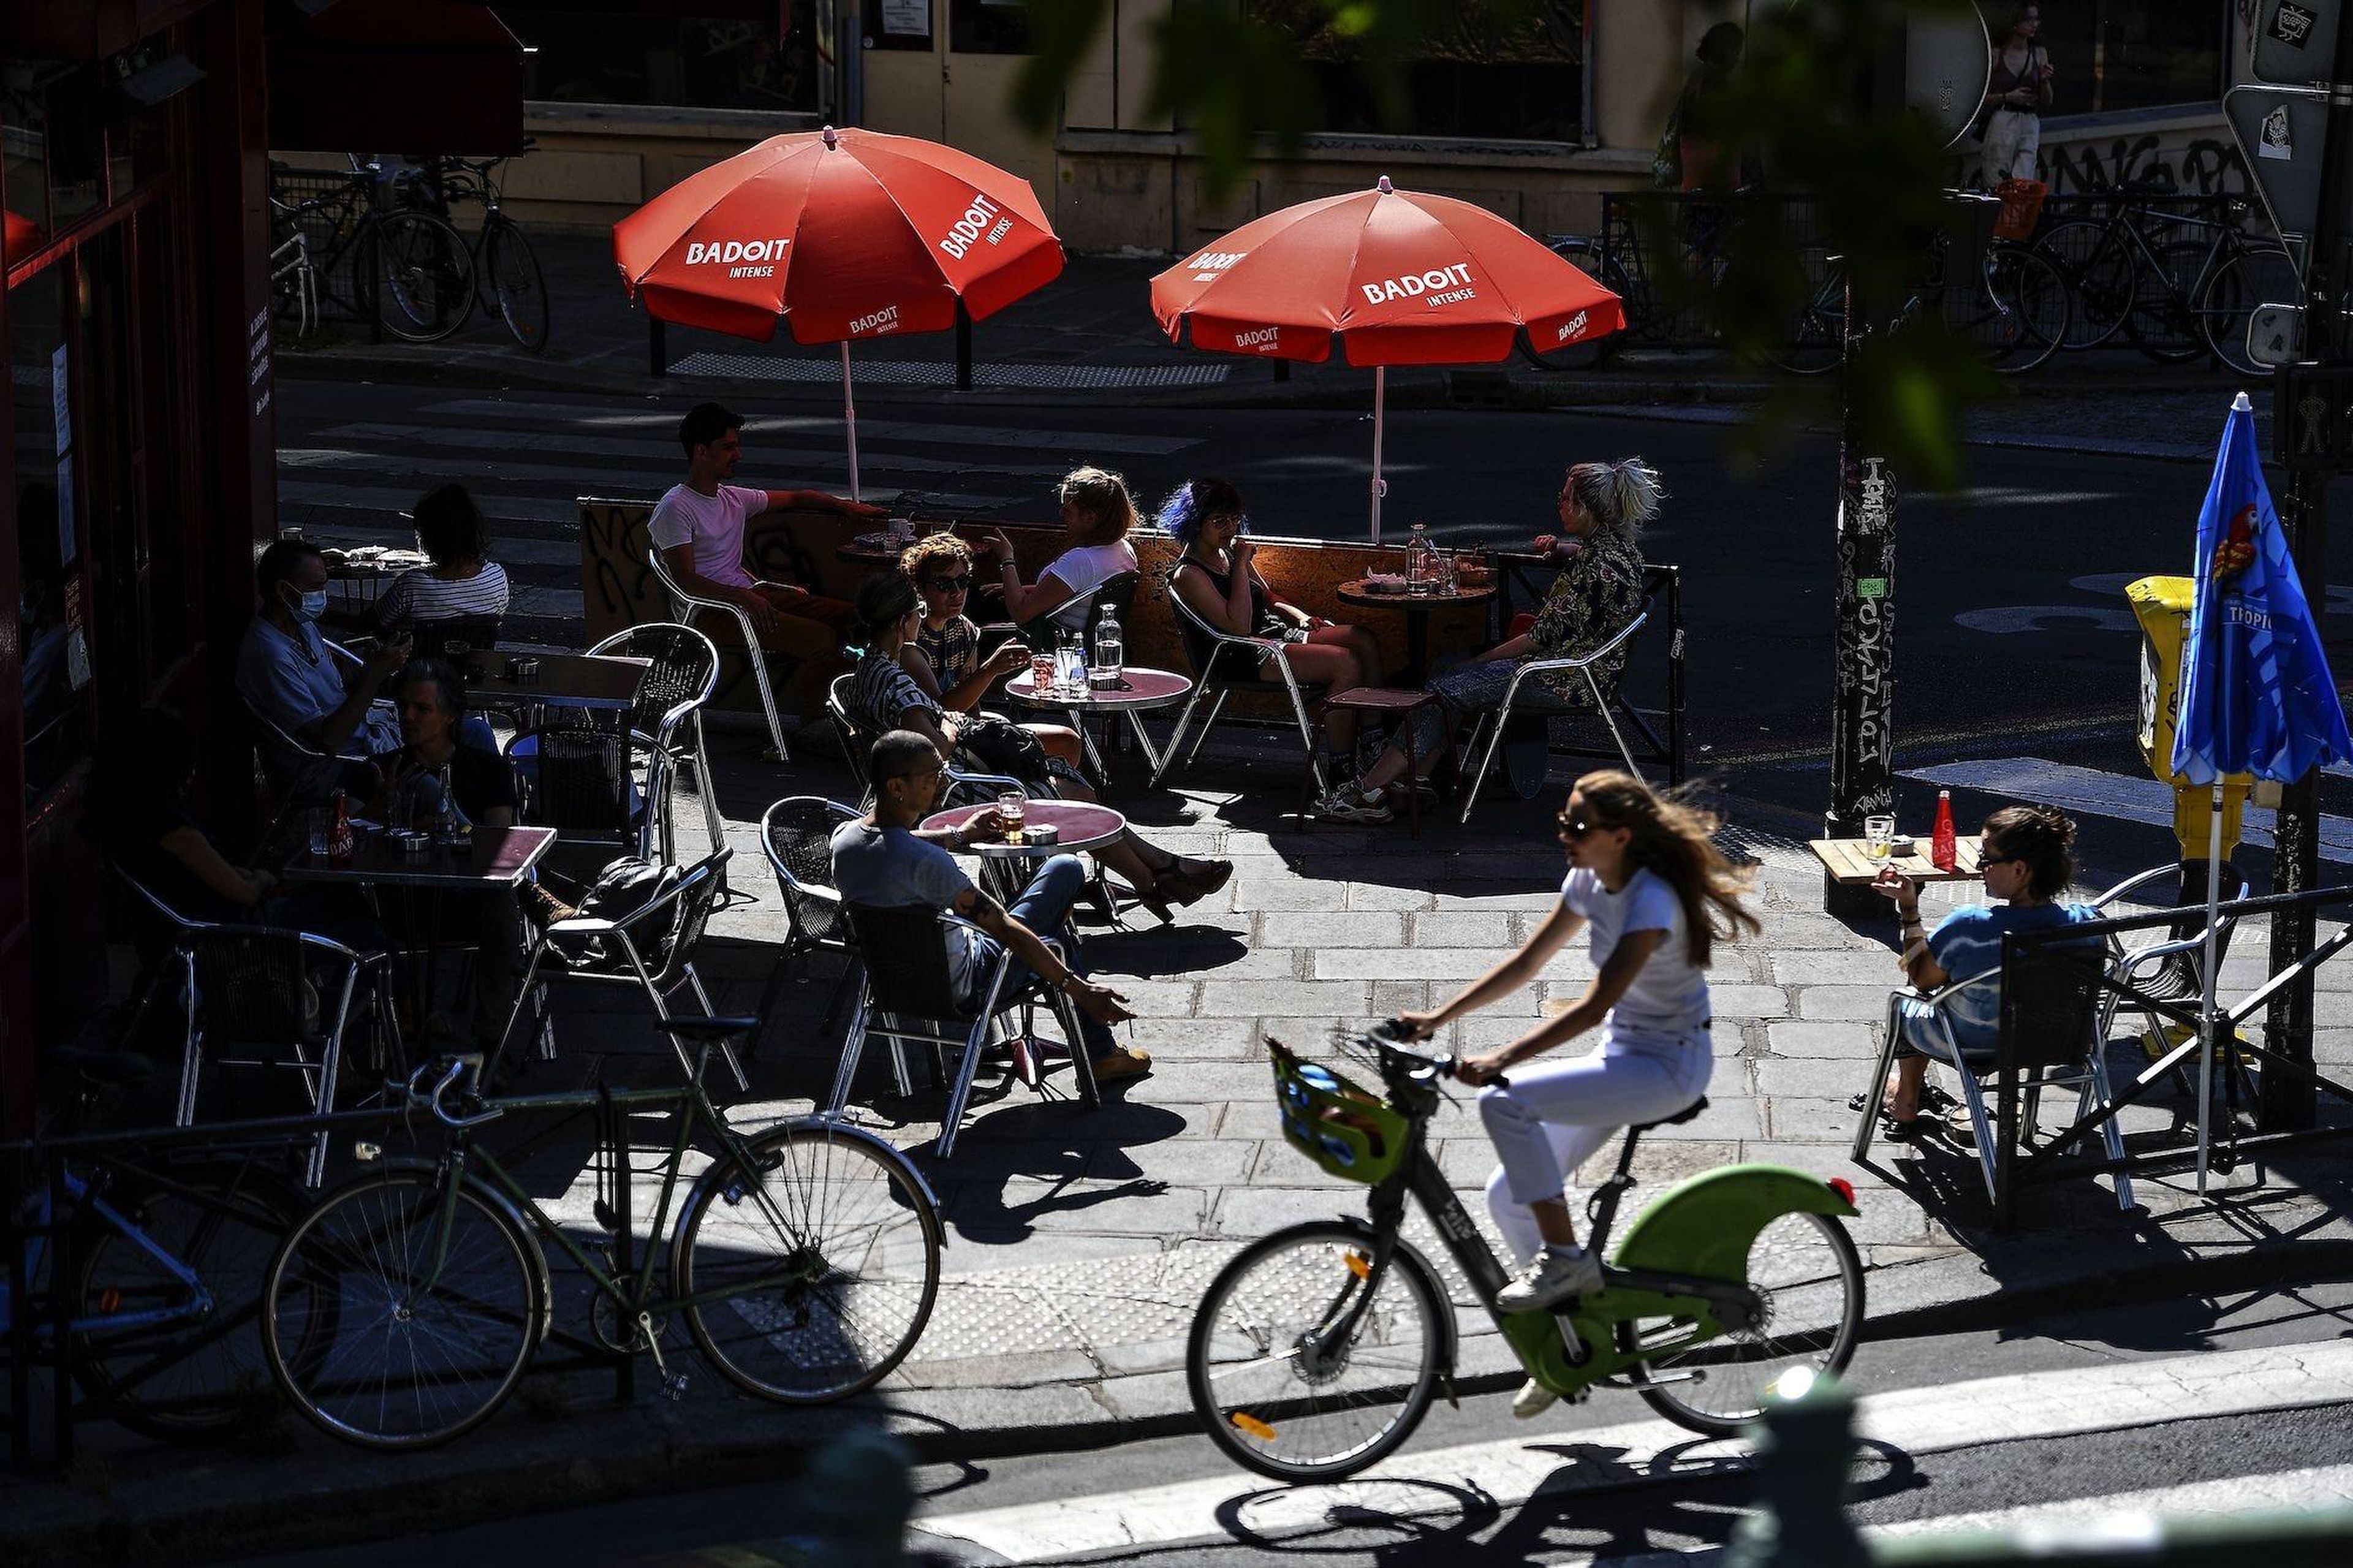 People have drinks at the terrasse of a cafe along the Canal Saint-Martin on a warm and sunny afternoon during a heatwave in Paris, on June 23, 2020 as France eases lockdown measures taken to curb the spread of the Covid-19 pandemic.